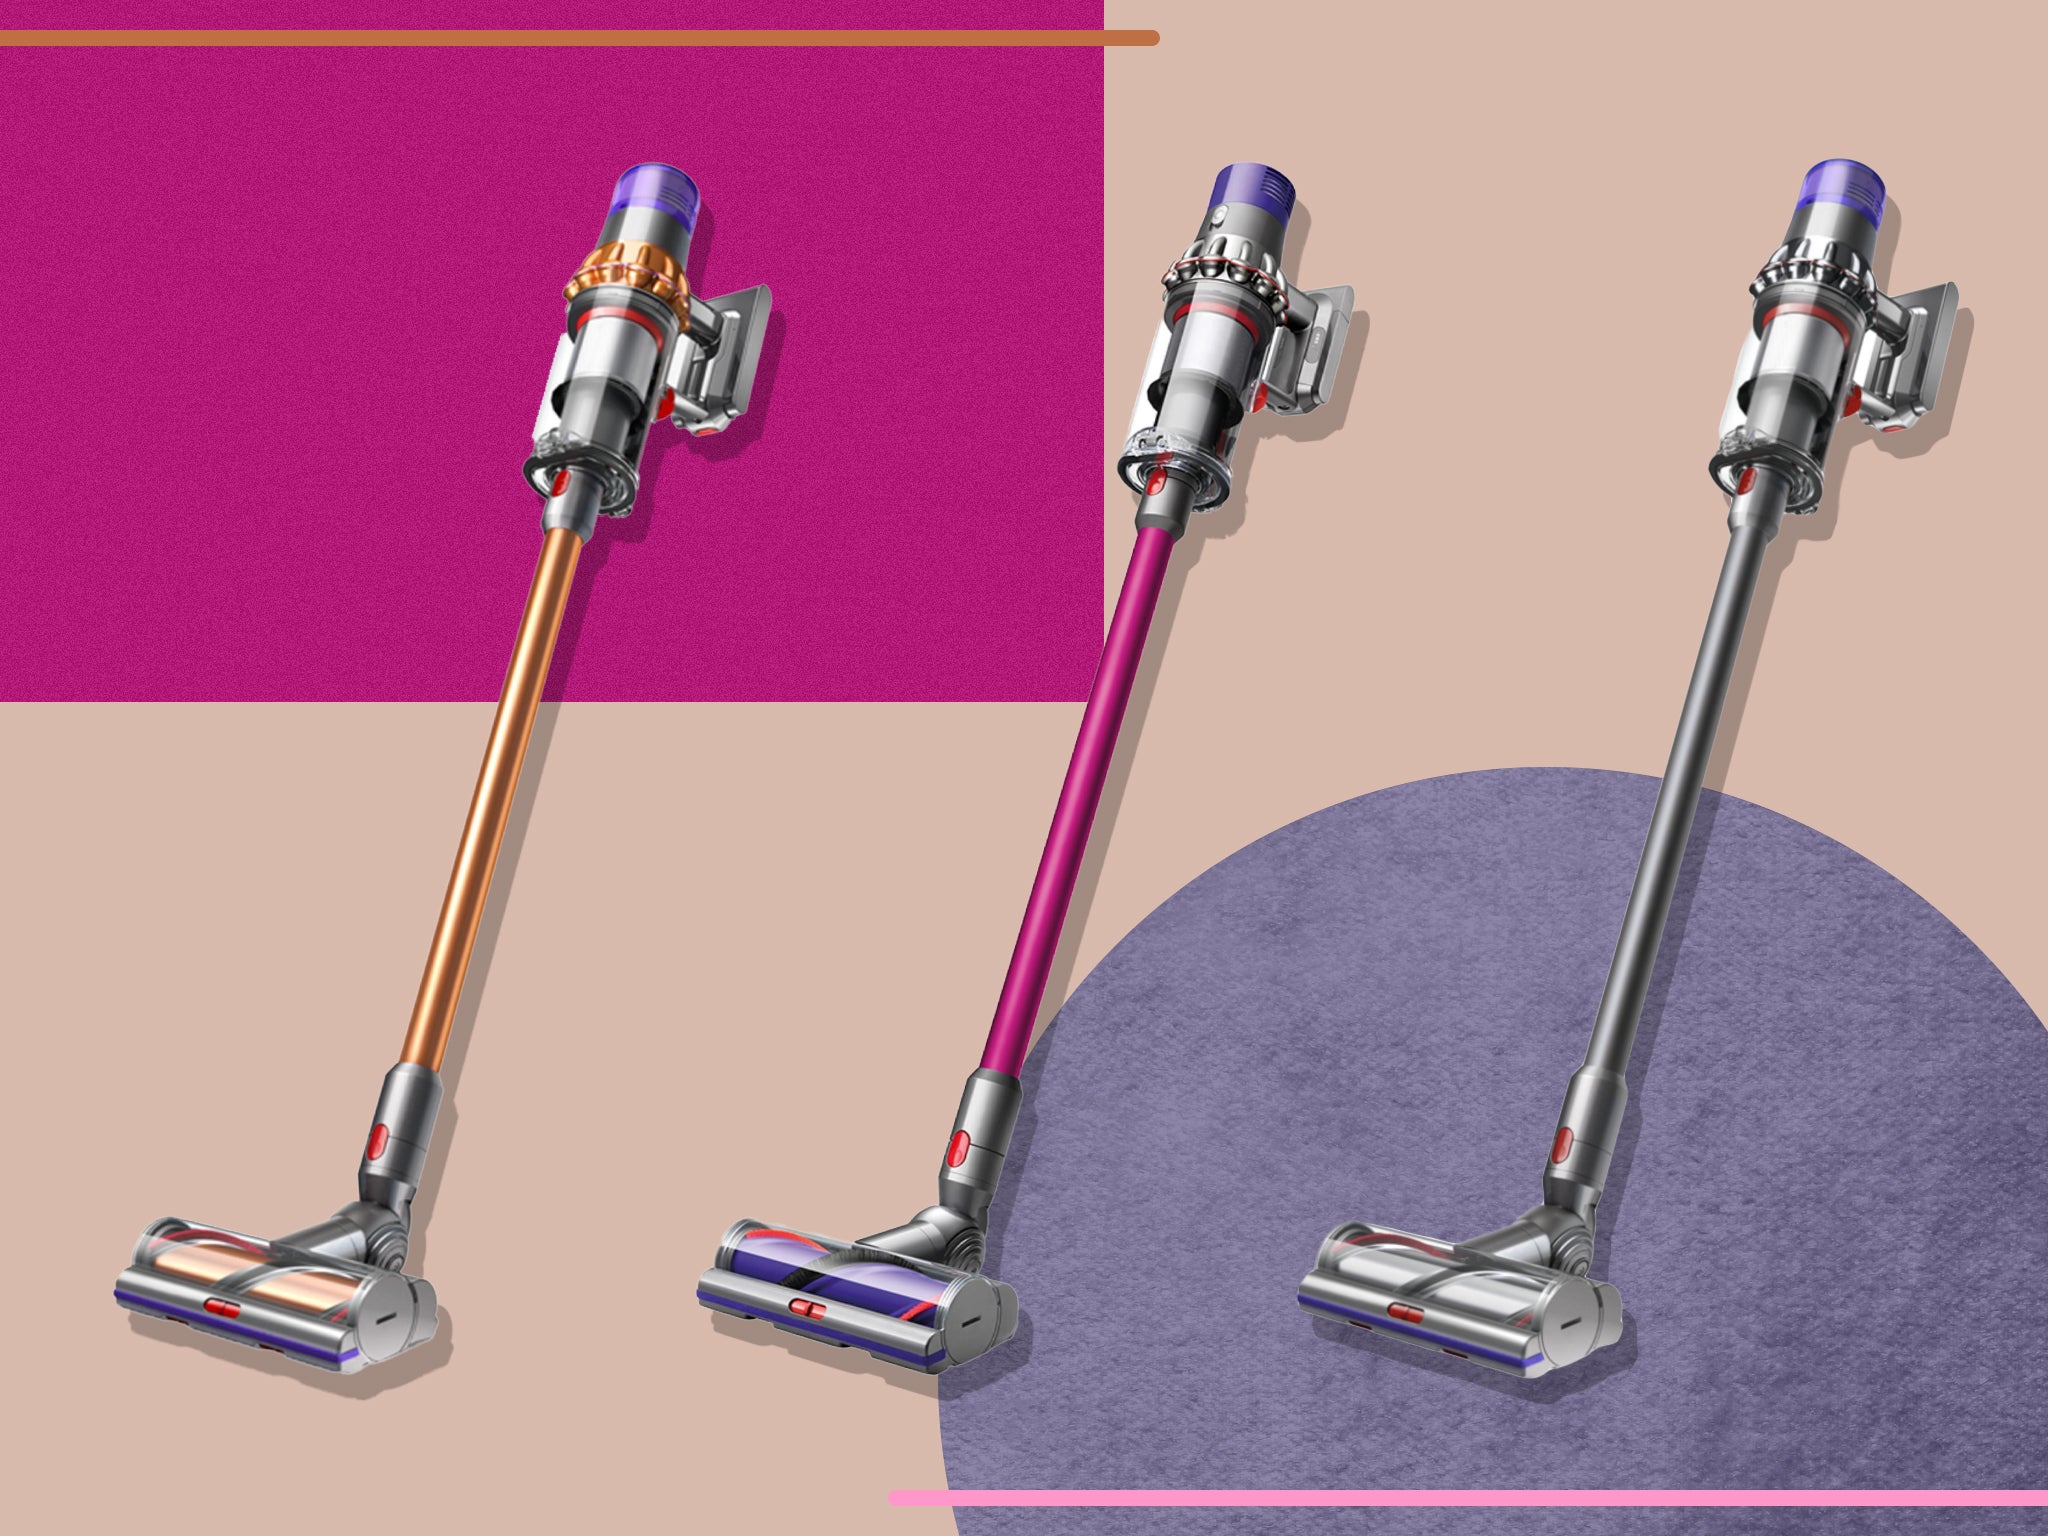 Dyson’s cordless models are perfect for speedy cleaning